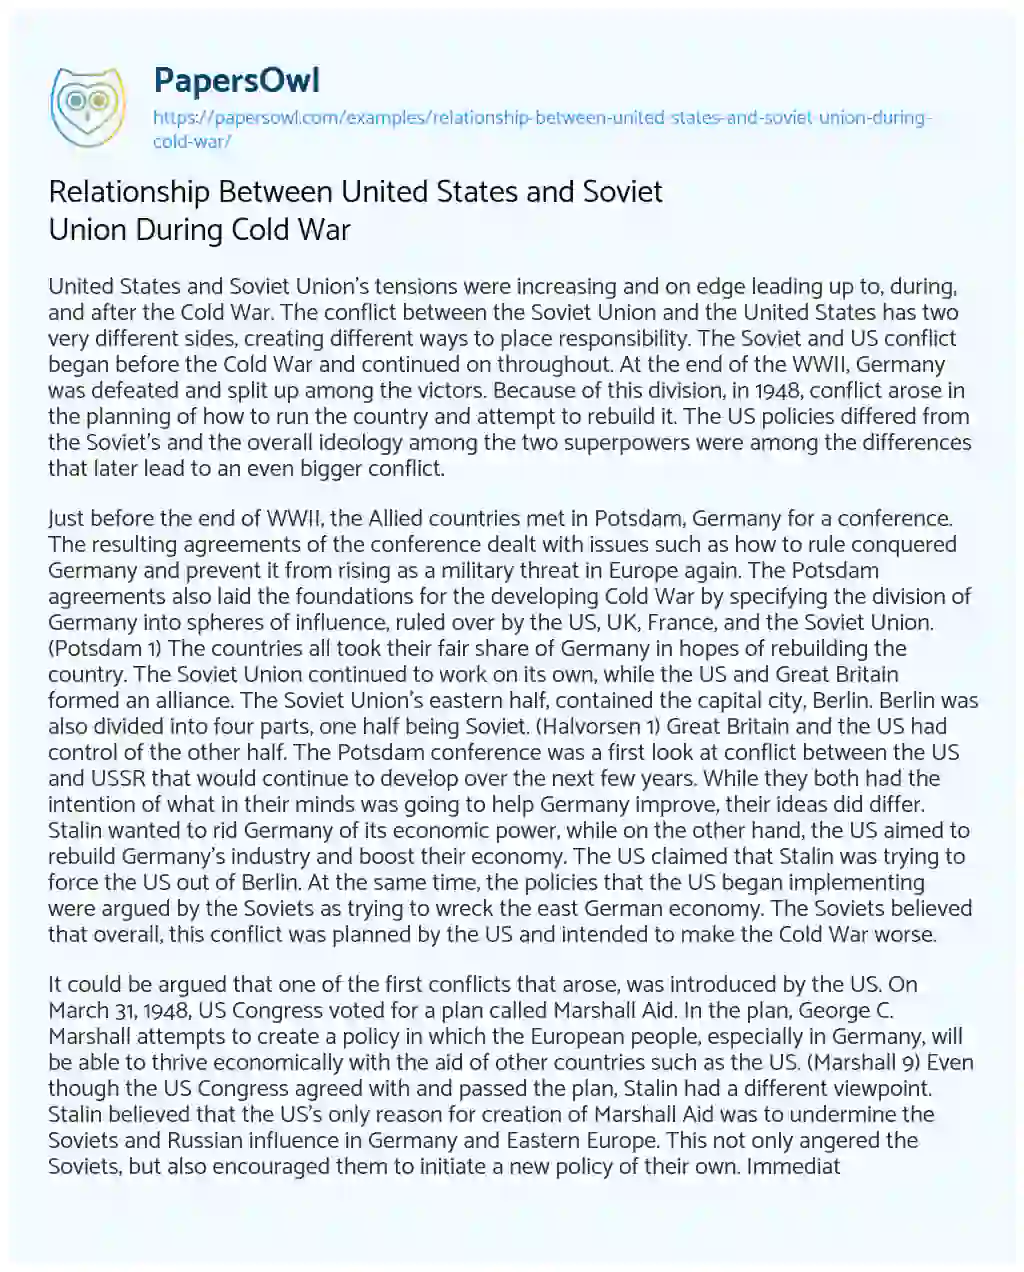 Essay on Relationship between United States and Soviet Union during Cold War